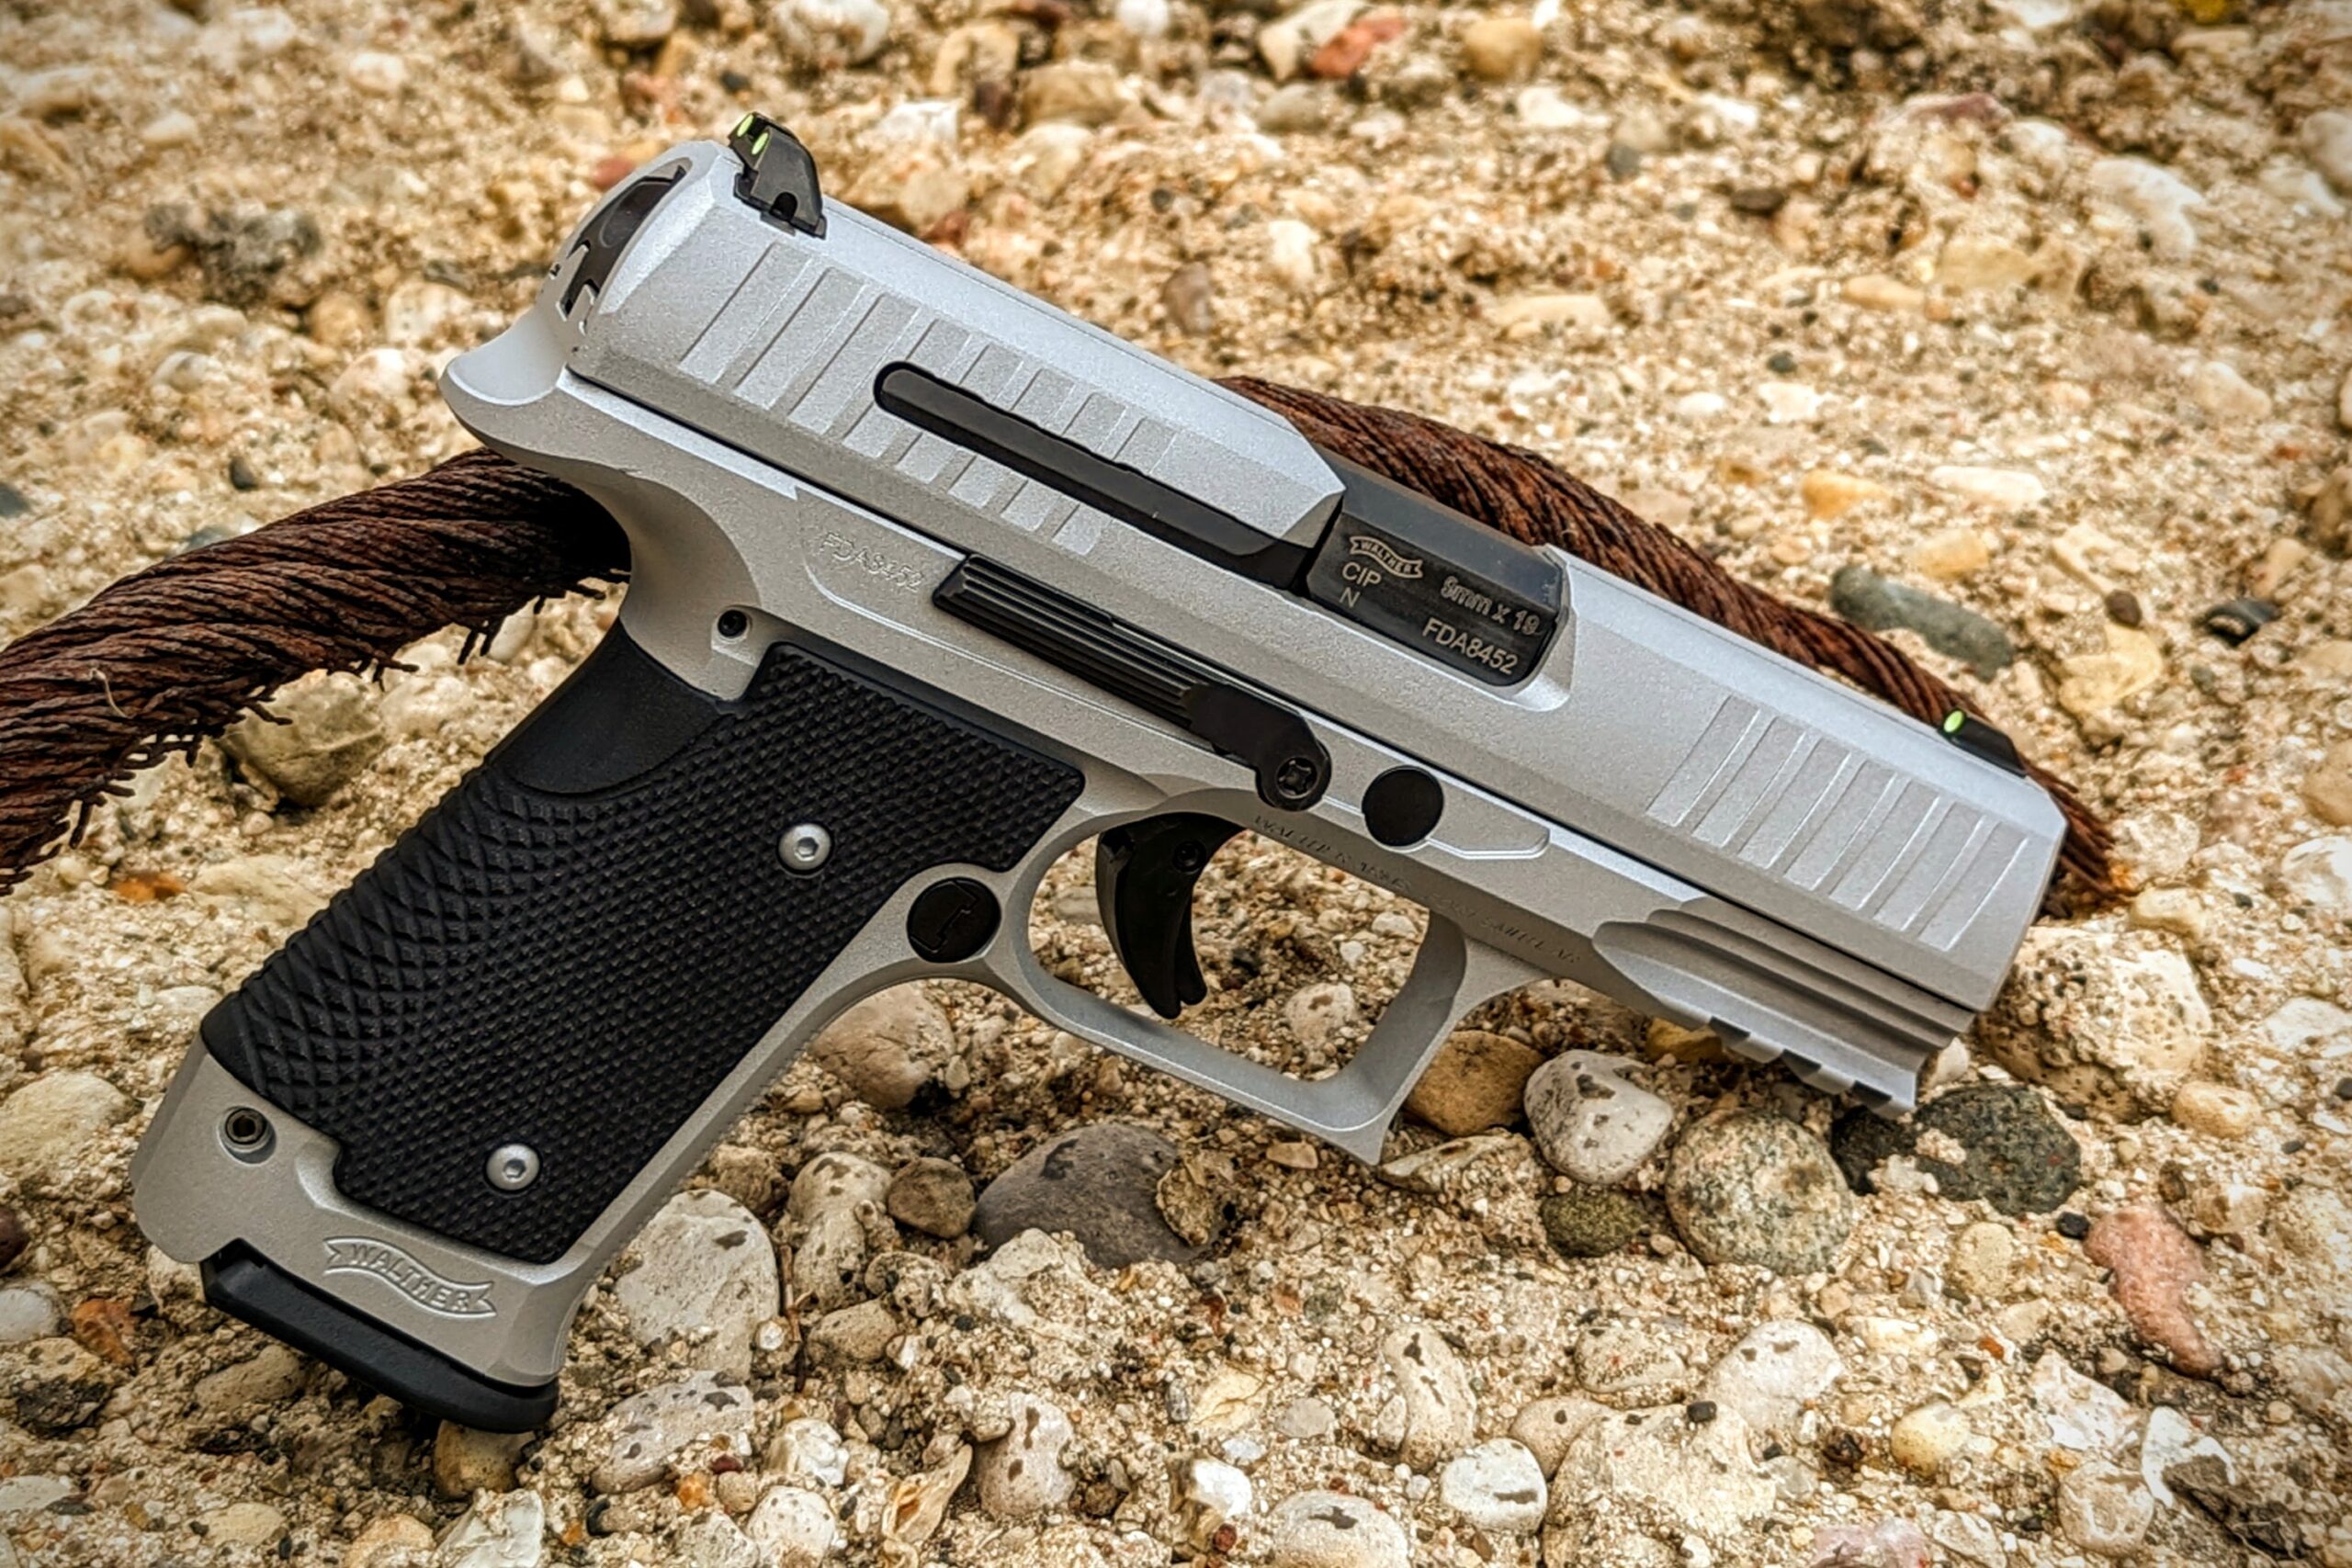 Walther pistol with crushed silver Cerakote